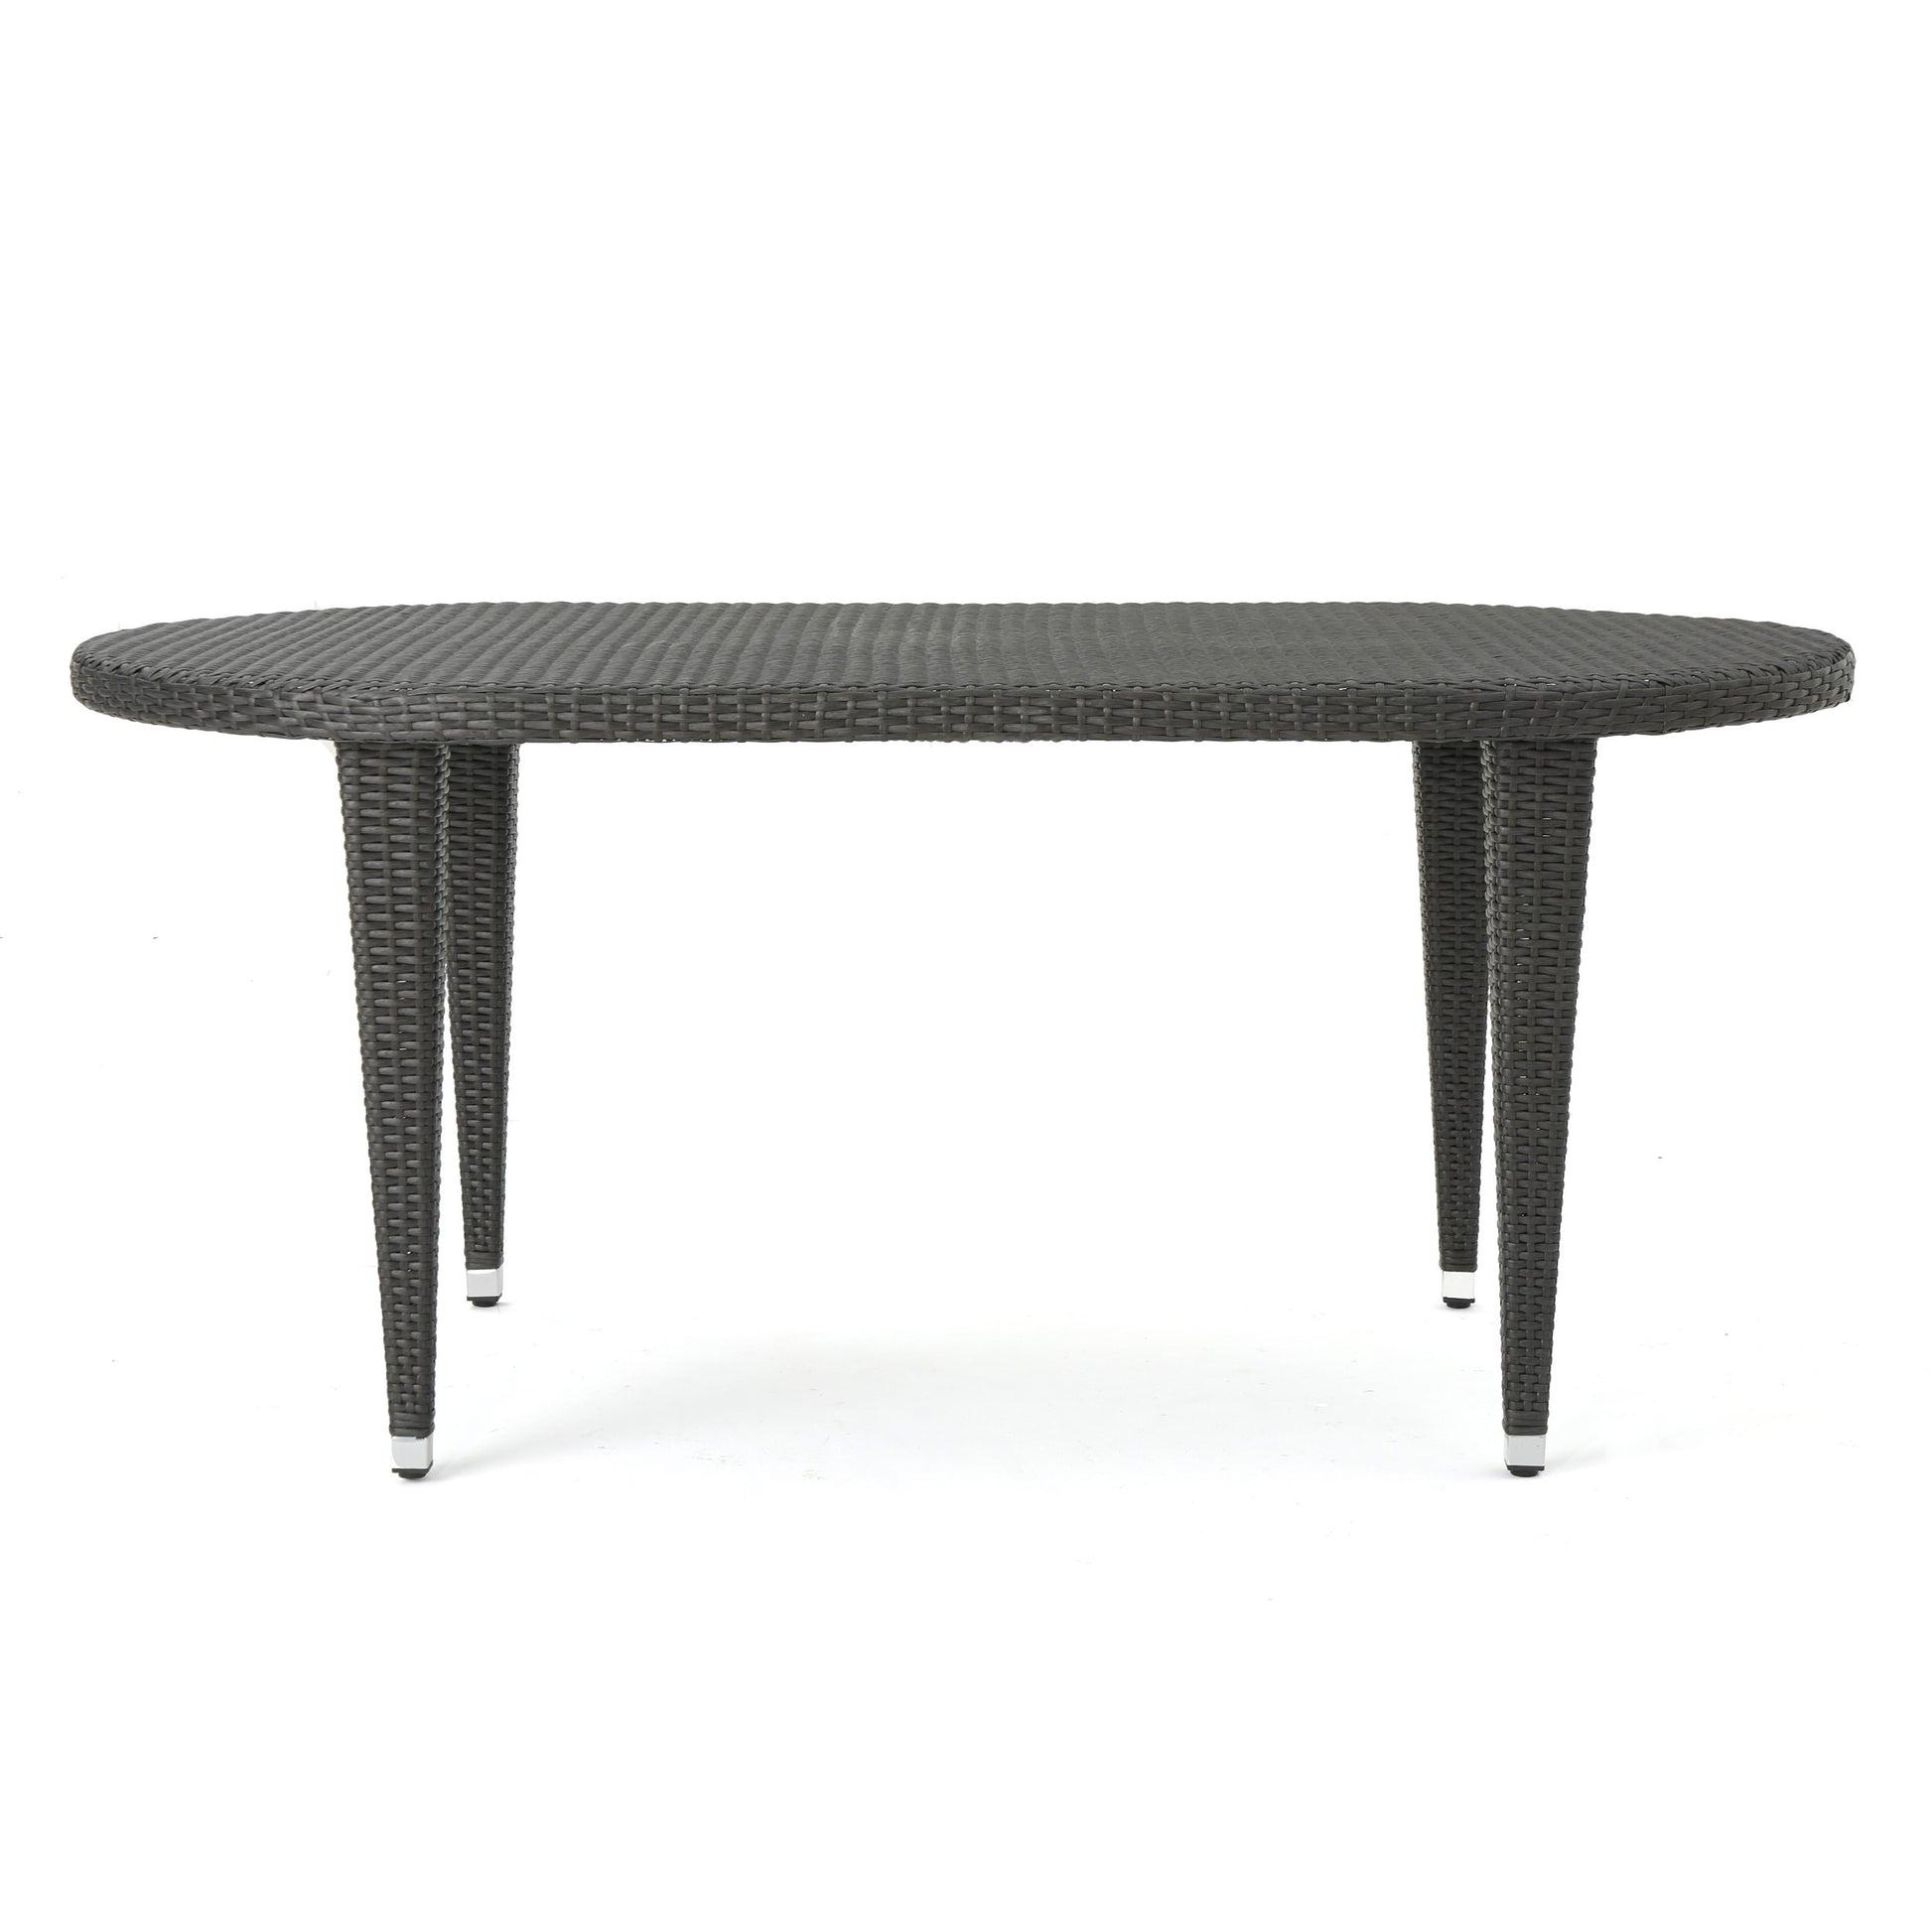 Dominica 6" Oval Dining Table - Grey Pe Rattan